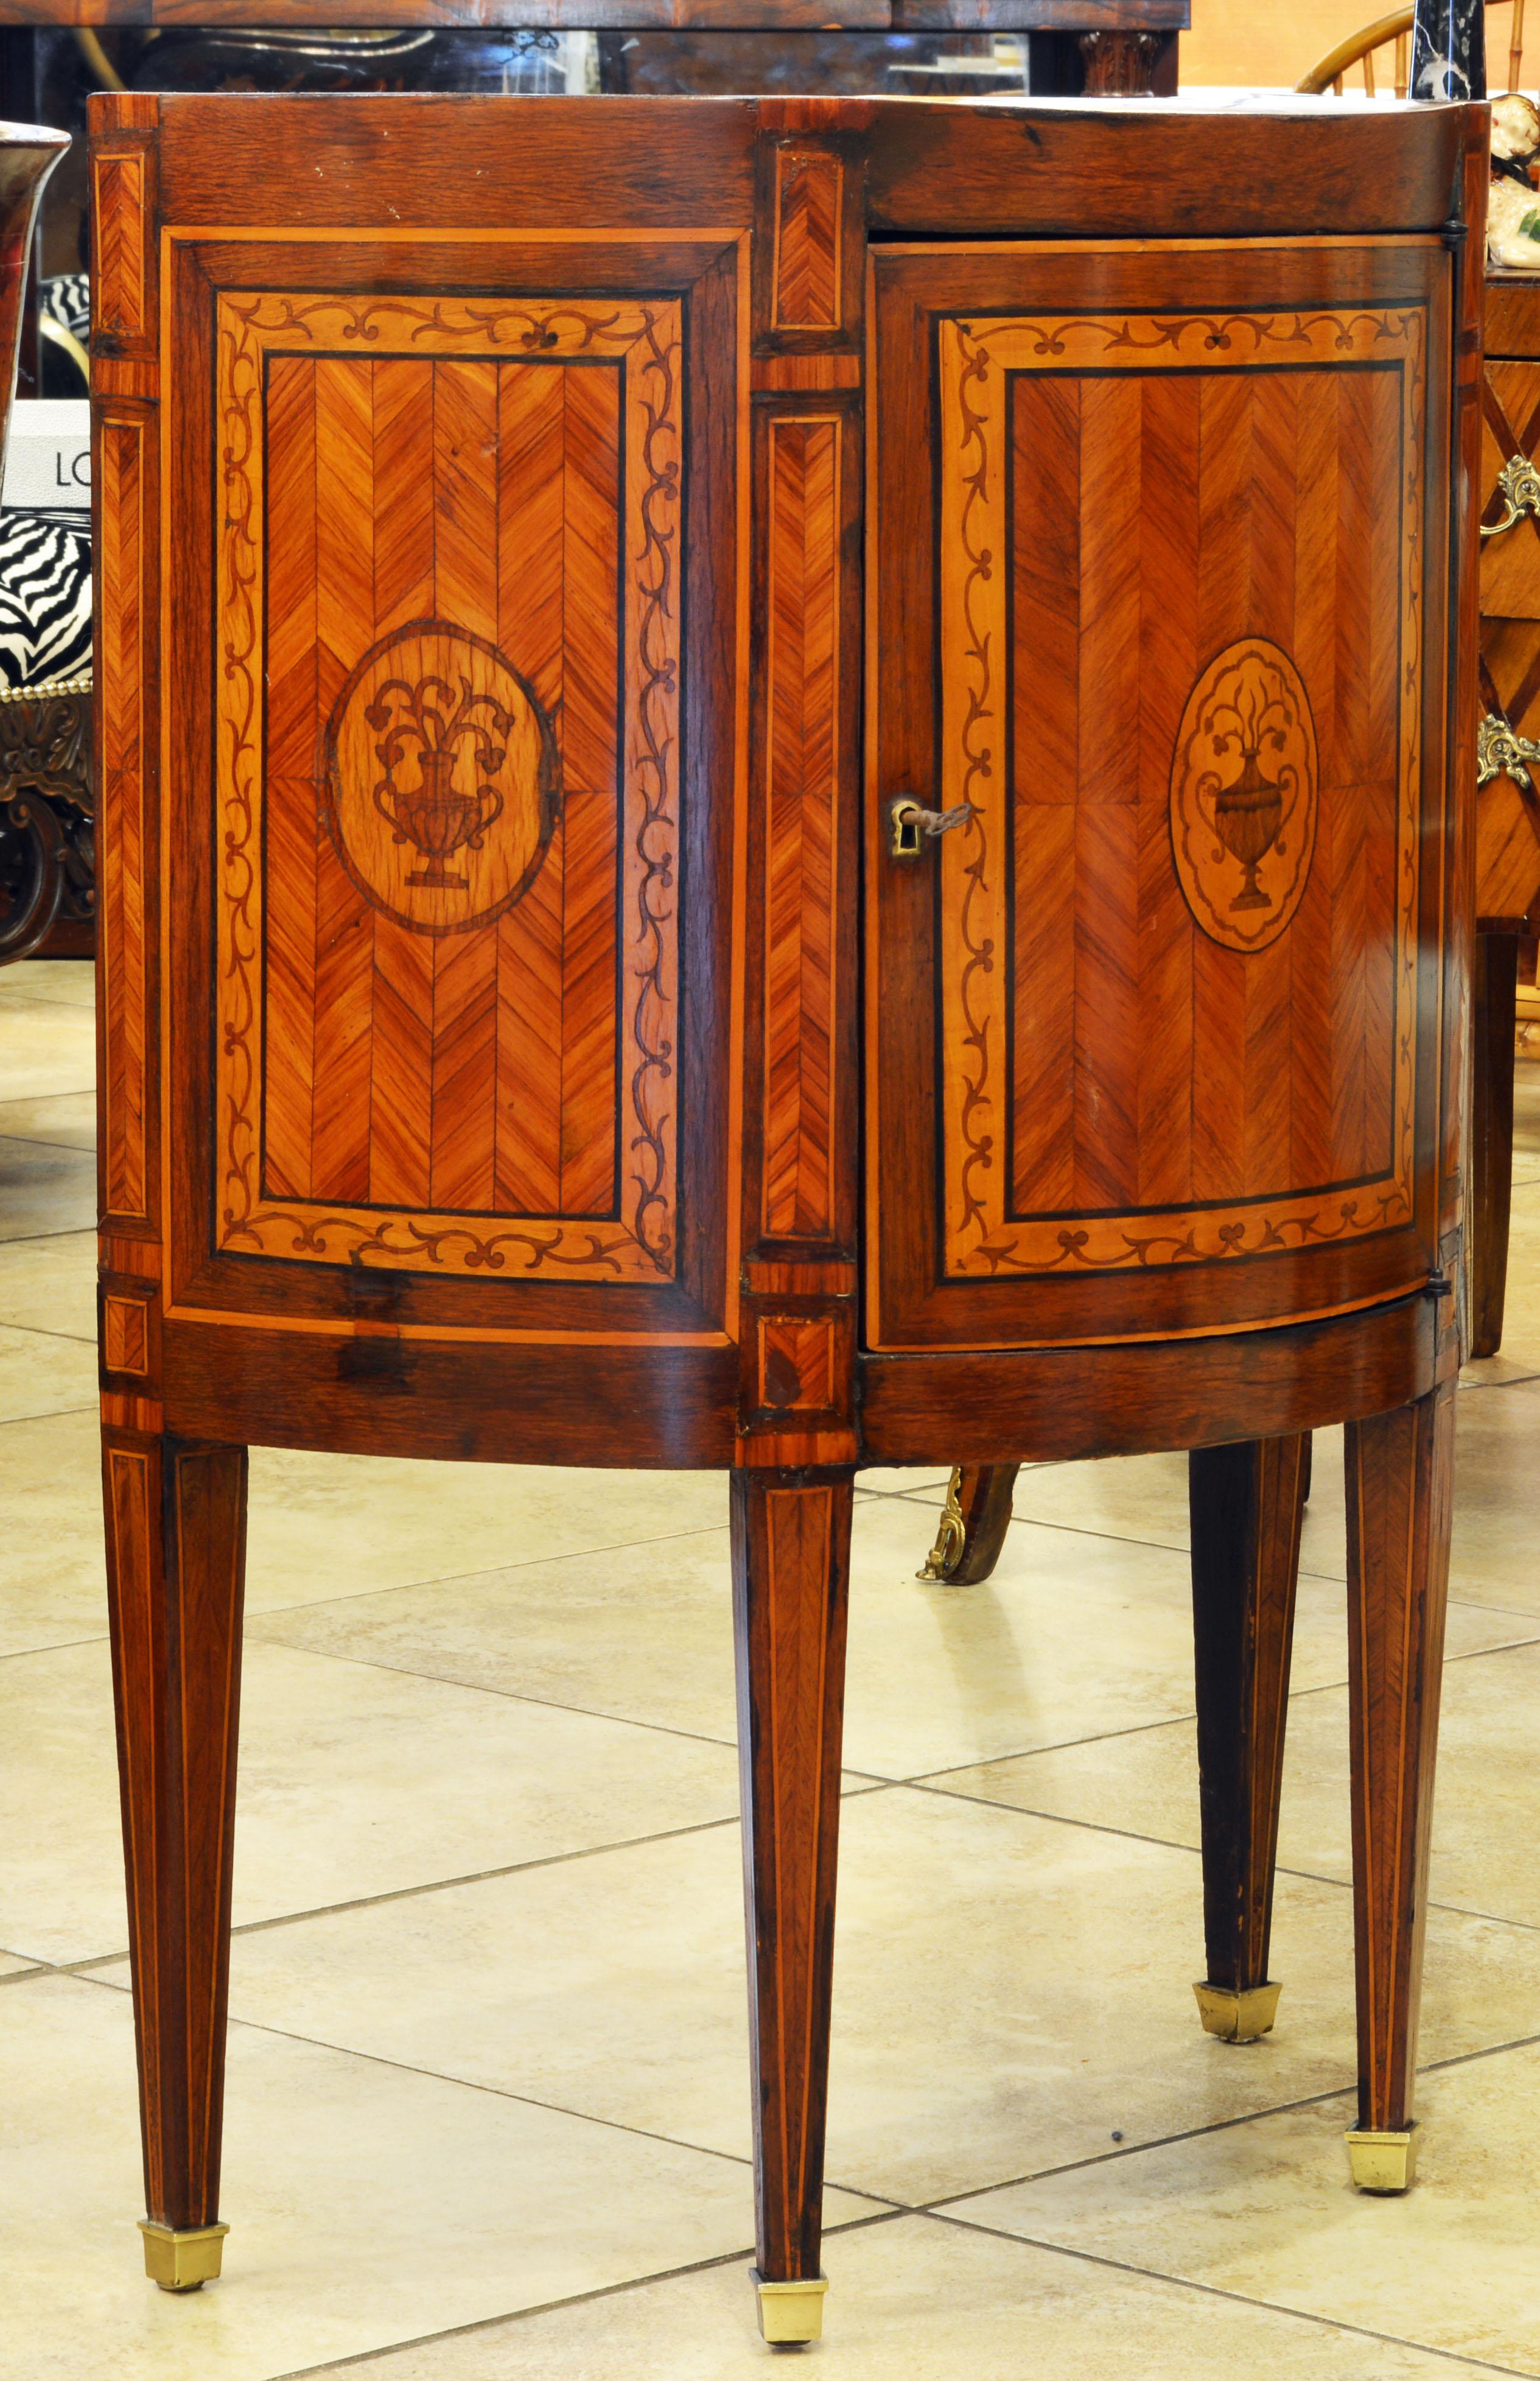 The caddy style top of this cabinet makes it extra attractive. The top is inlaid parquetry style and centering a classical urn motif typical of the Louis XVI style. The door and the flanking panels are similarly inlaid with parquetry, banding,